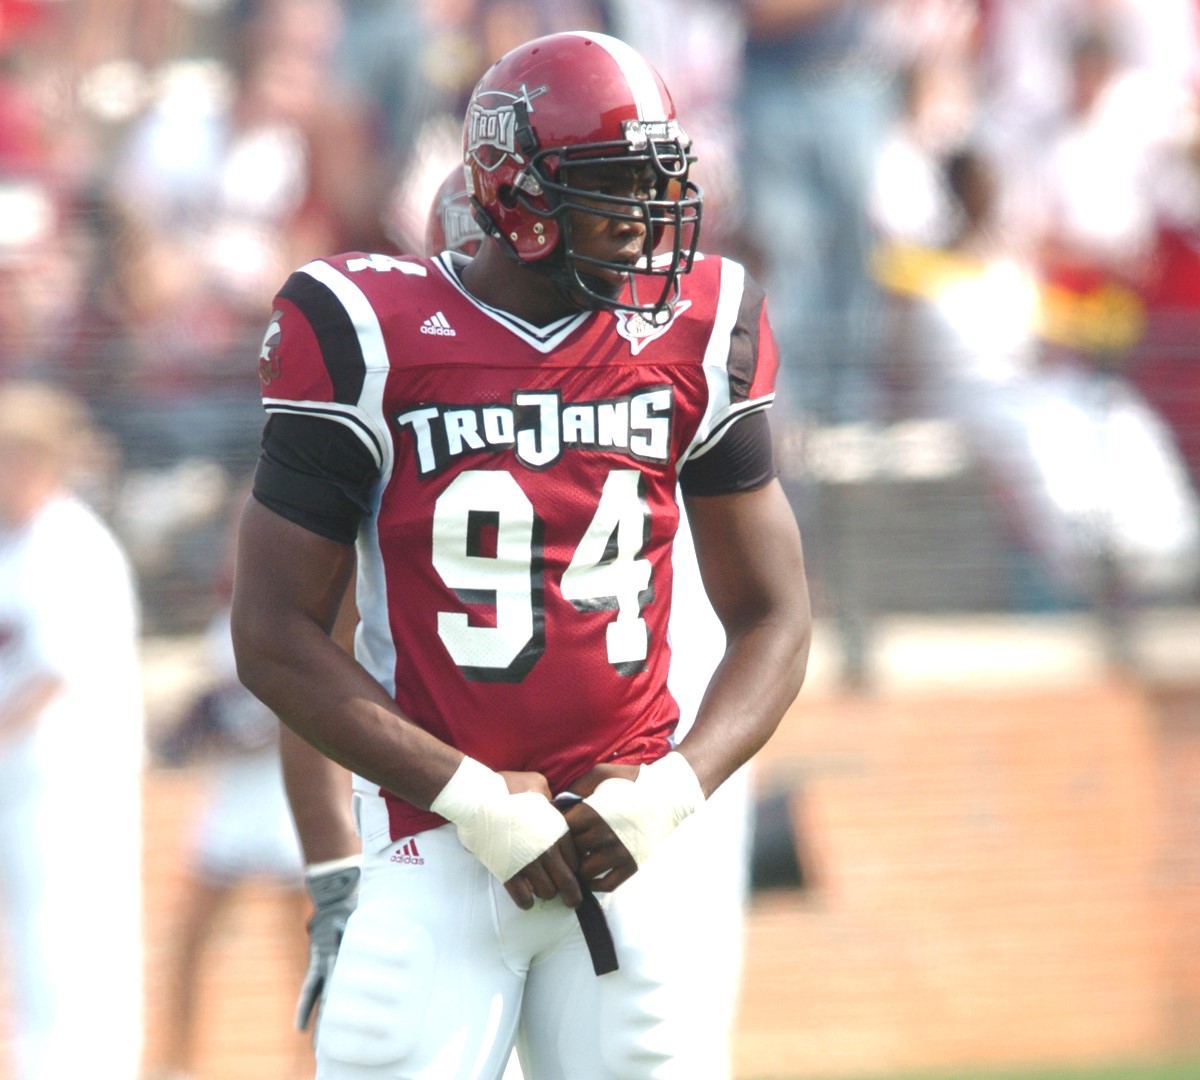 #CFB returns in 94 days

DeMarcus Ware - Troy